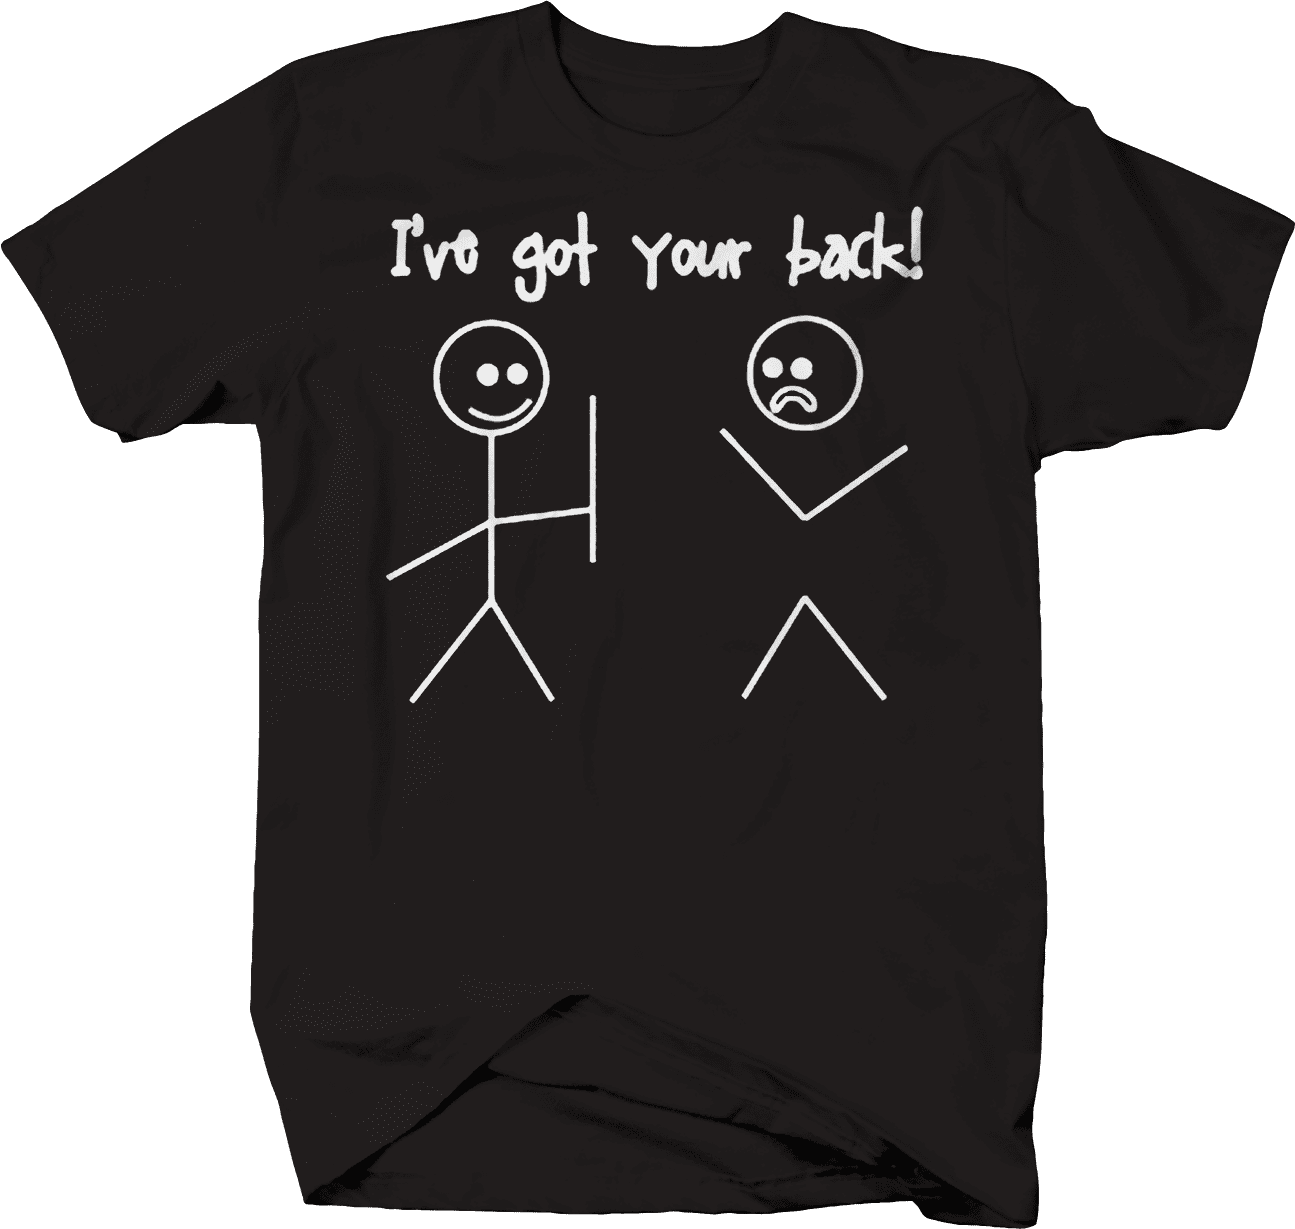 I got your back t-shirt stick figure funny unisex graphic tee Small ...